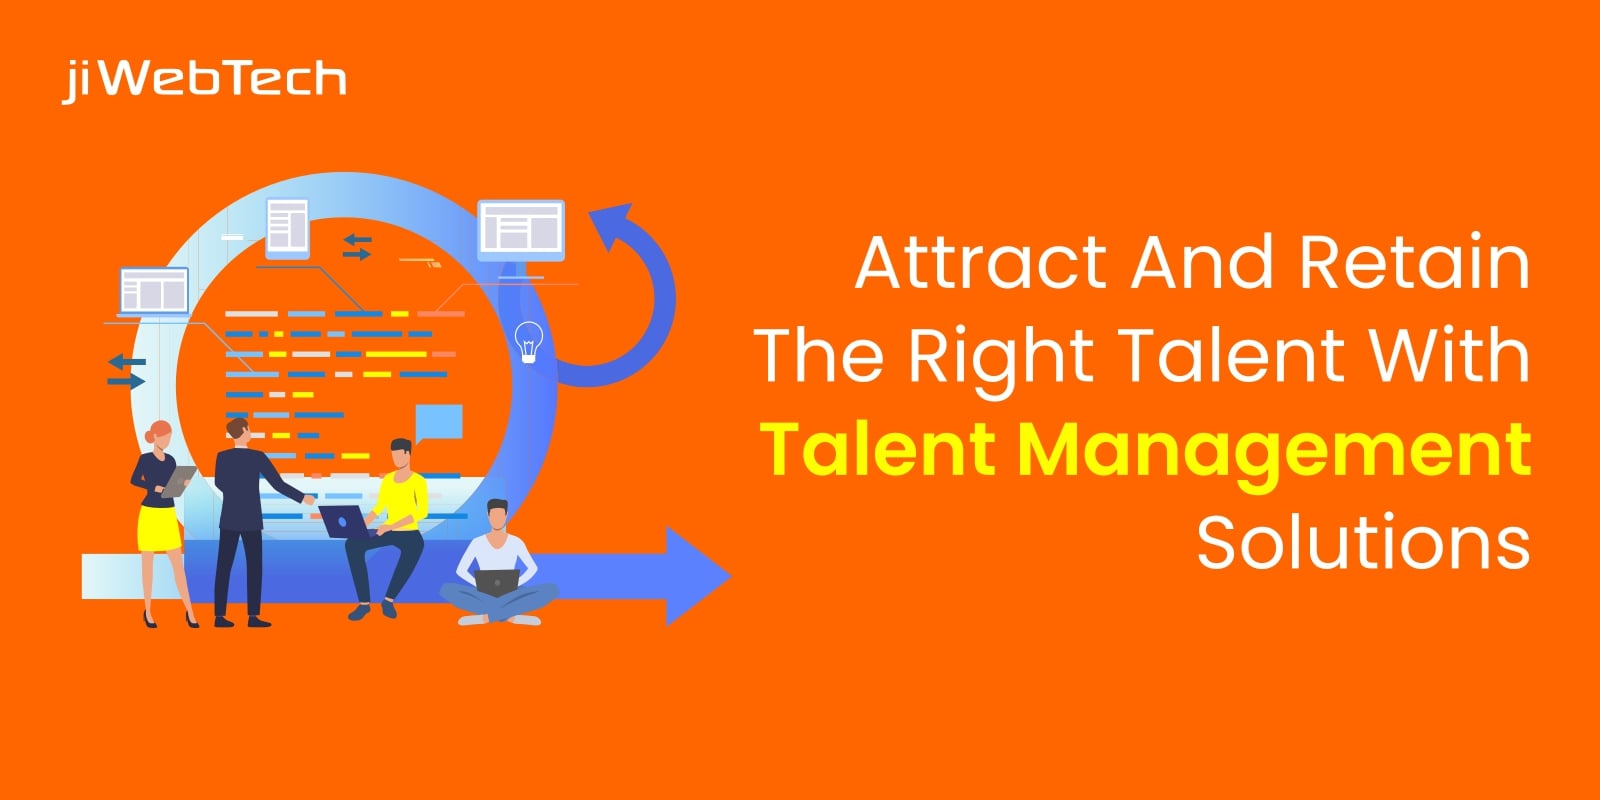 Attract and Retain The Right Talent With Talent Management Solutions